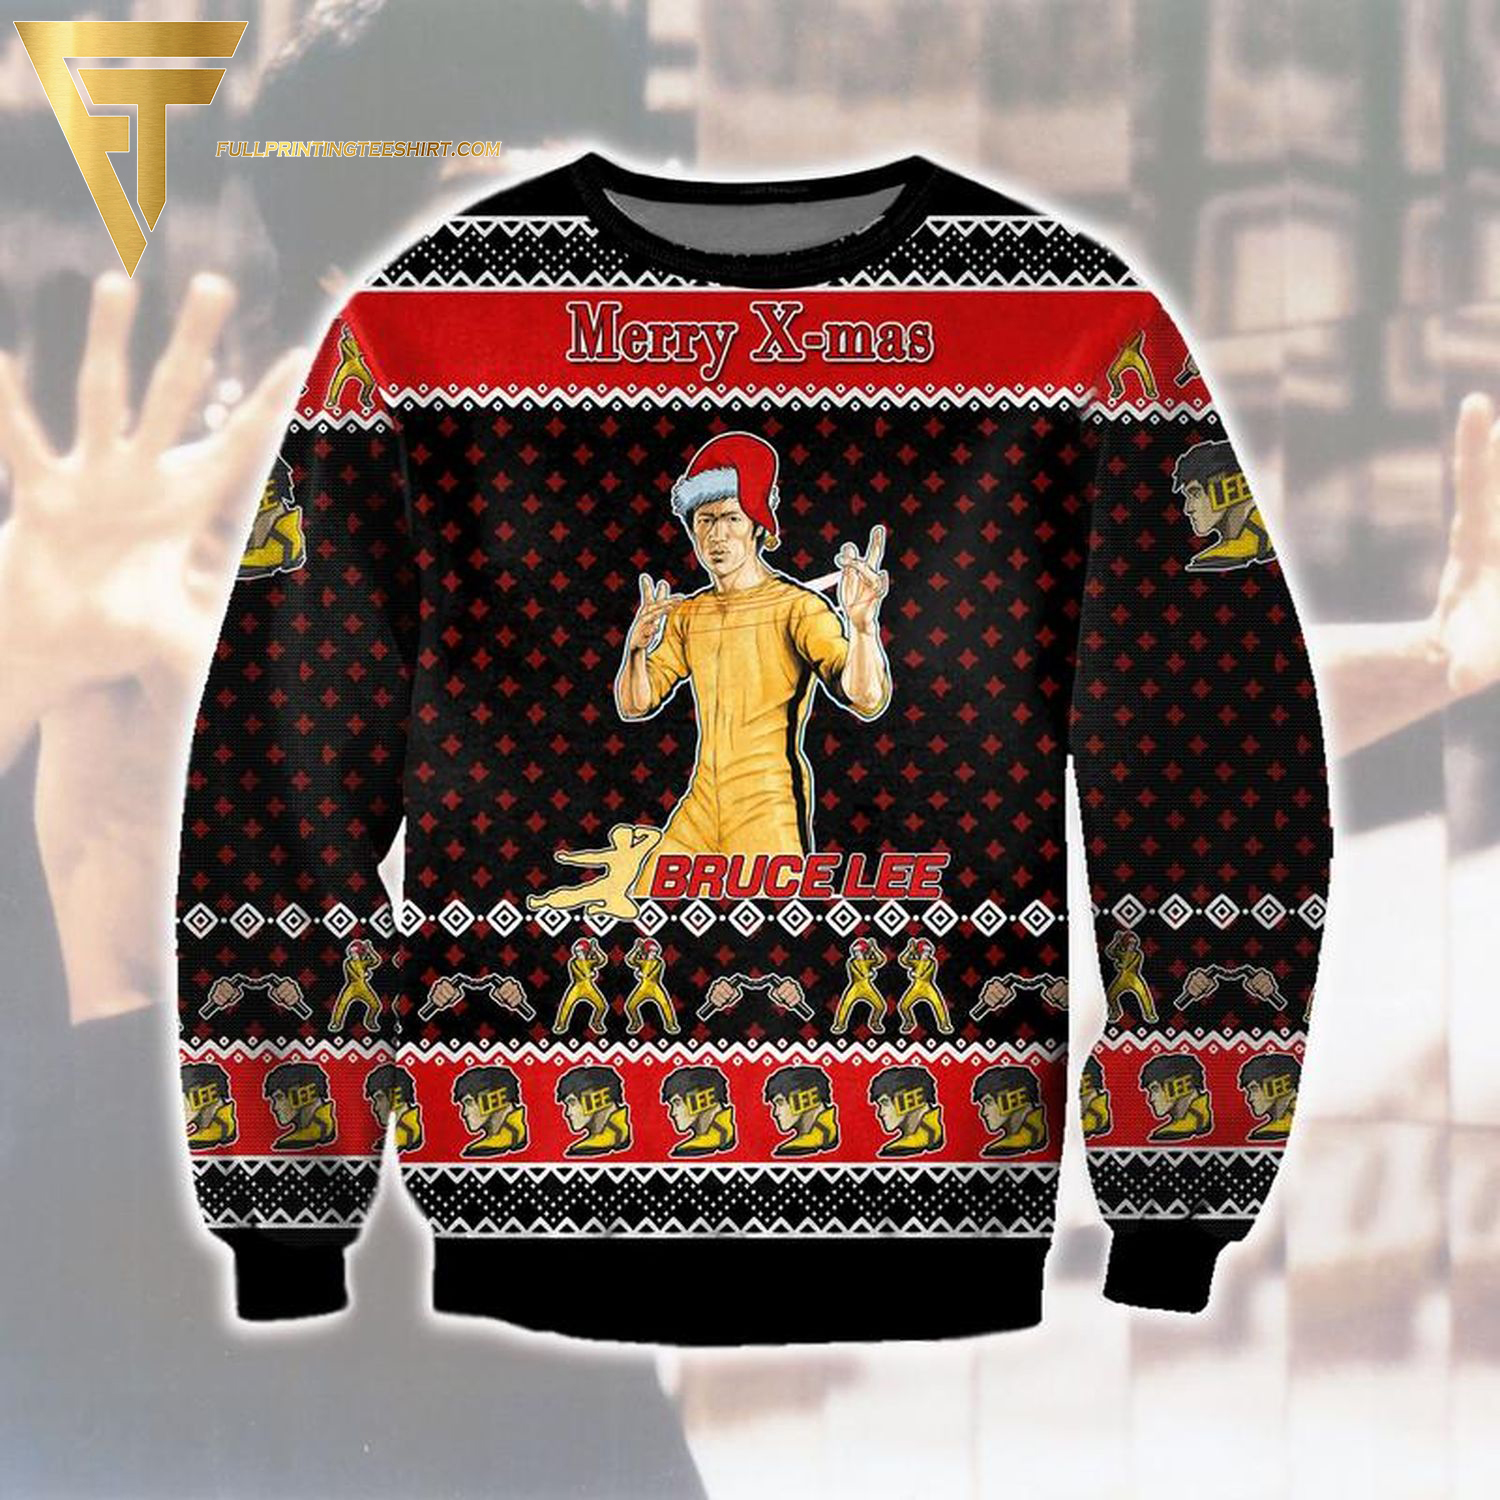 Bruce Lee Merry X-mas Full Print Ugly Christmas Sweater